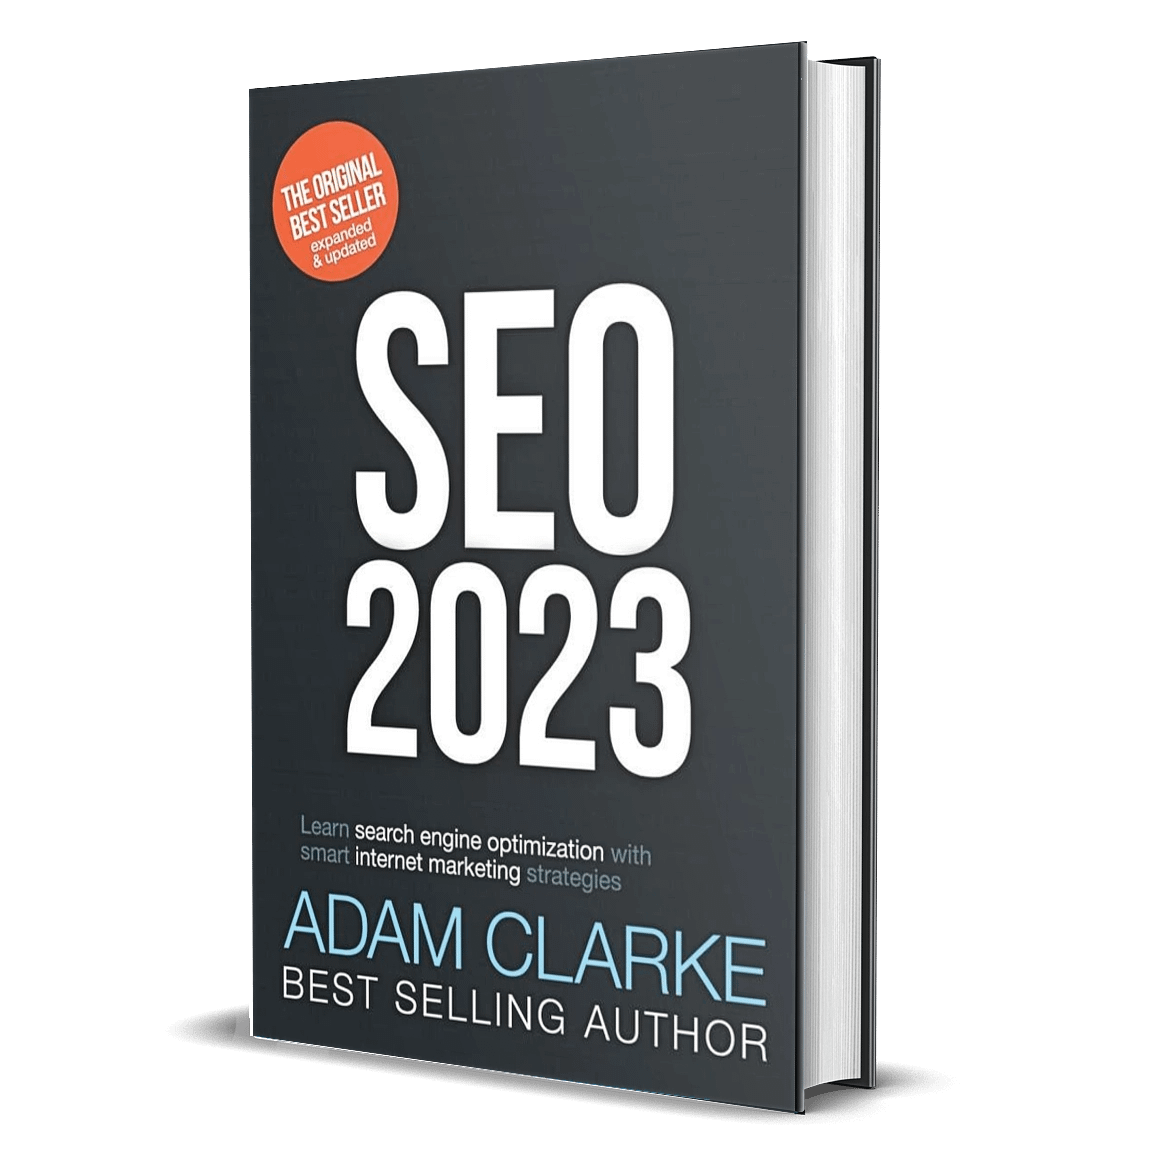 SEO 2023 by Adam Clarke is considered the top blogging book resource for SEO.